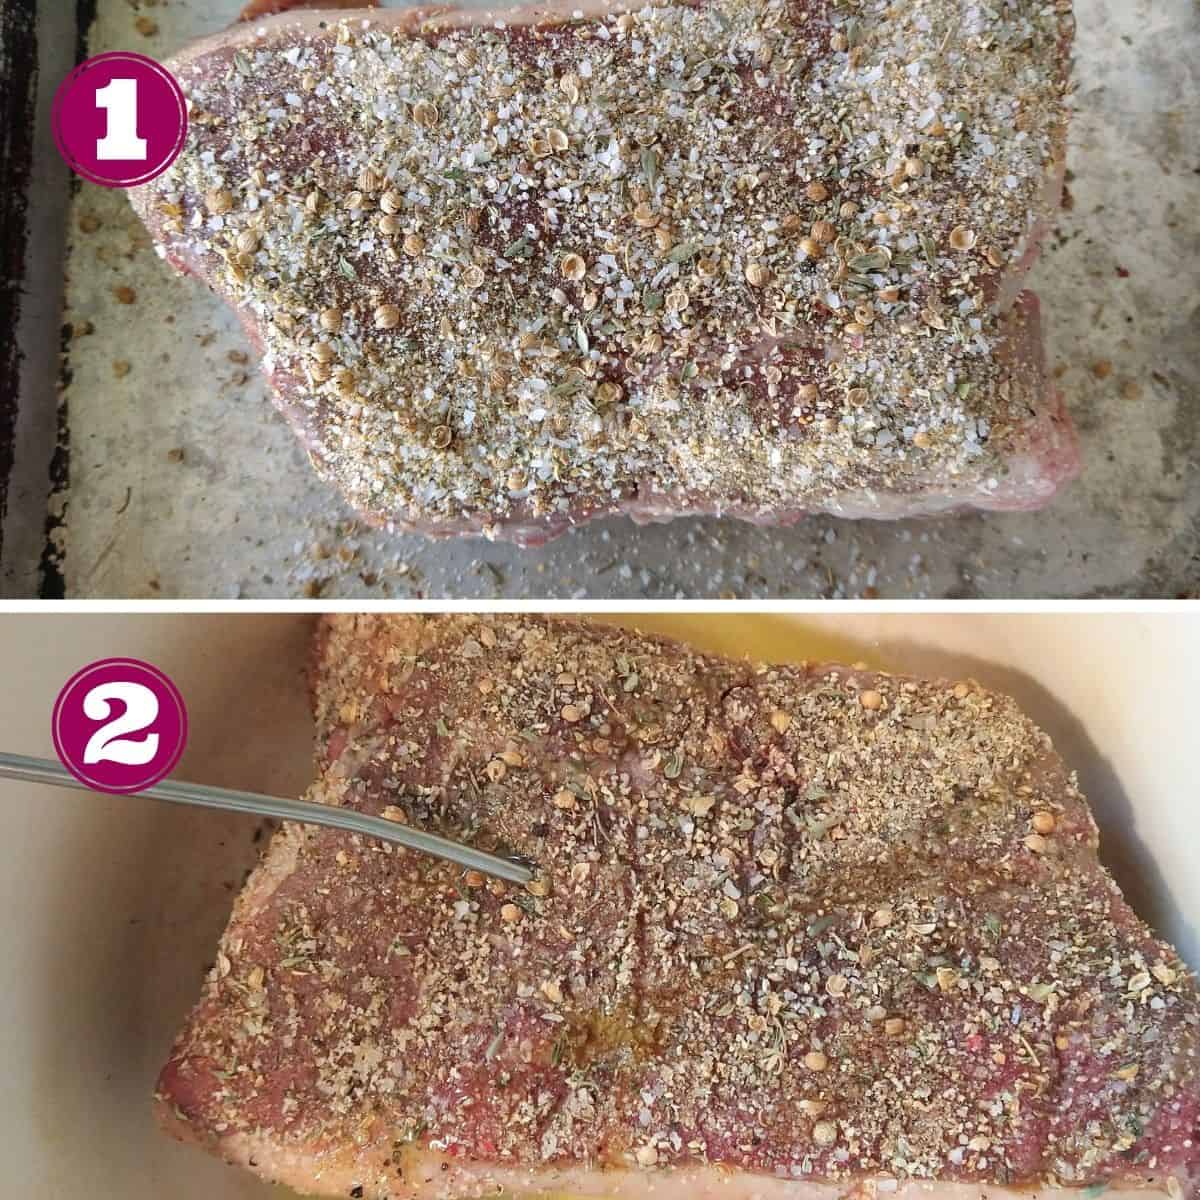 Step 1 shows a bottom round roast covered in a dry rub on a metal sheet pan.
Step 2 shows the roast in a Dutch oven with a probe sticking into the center of the roast.